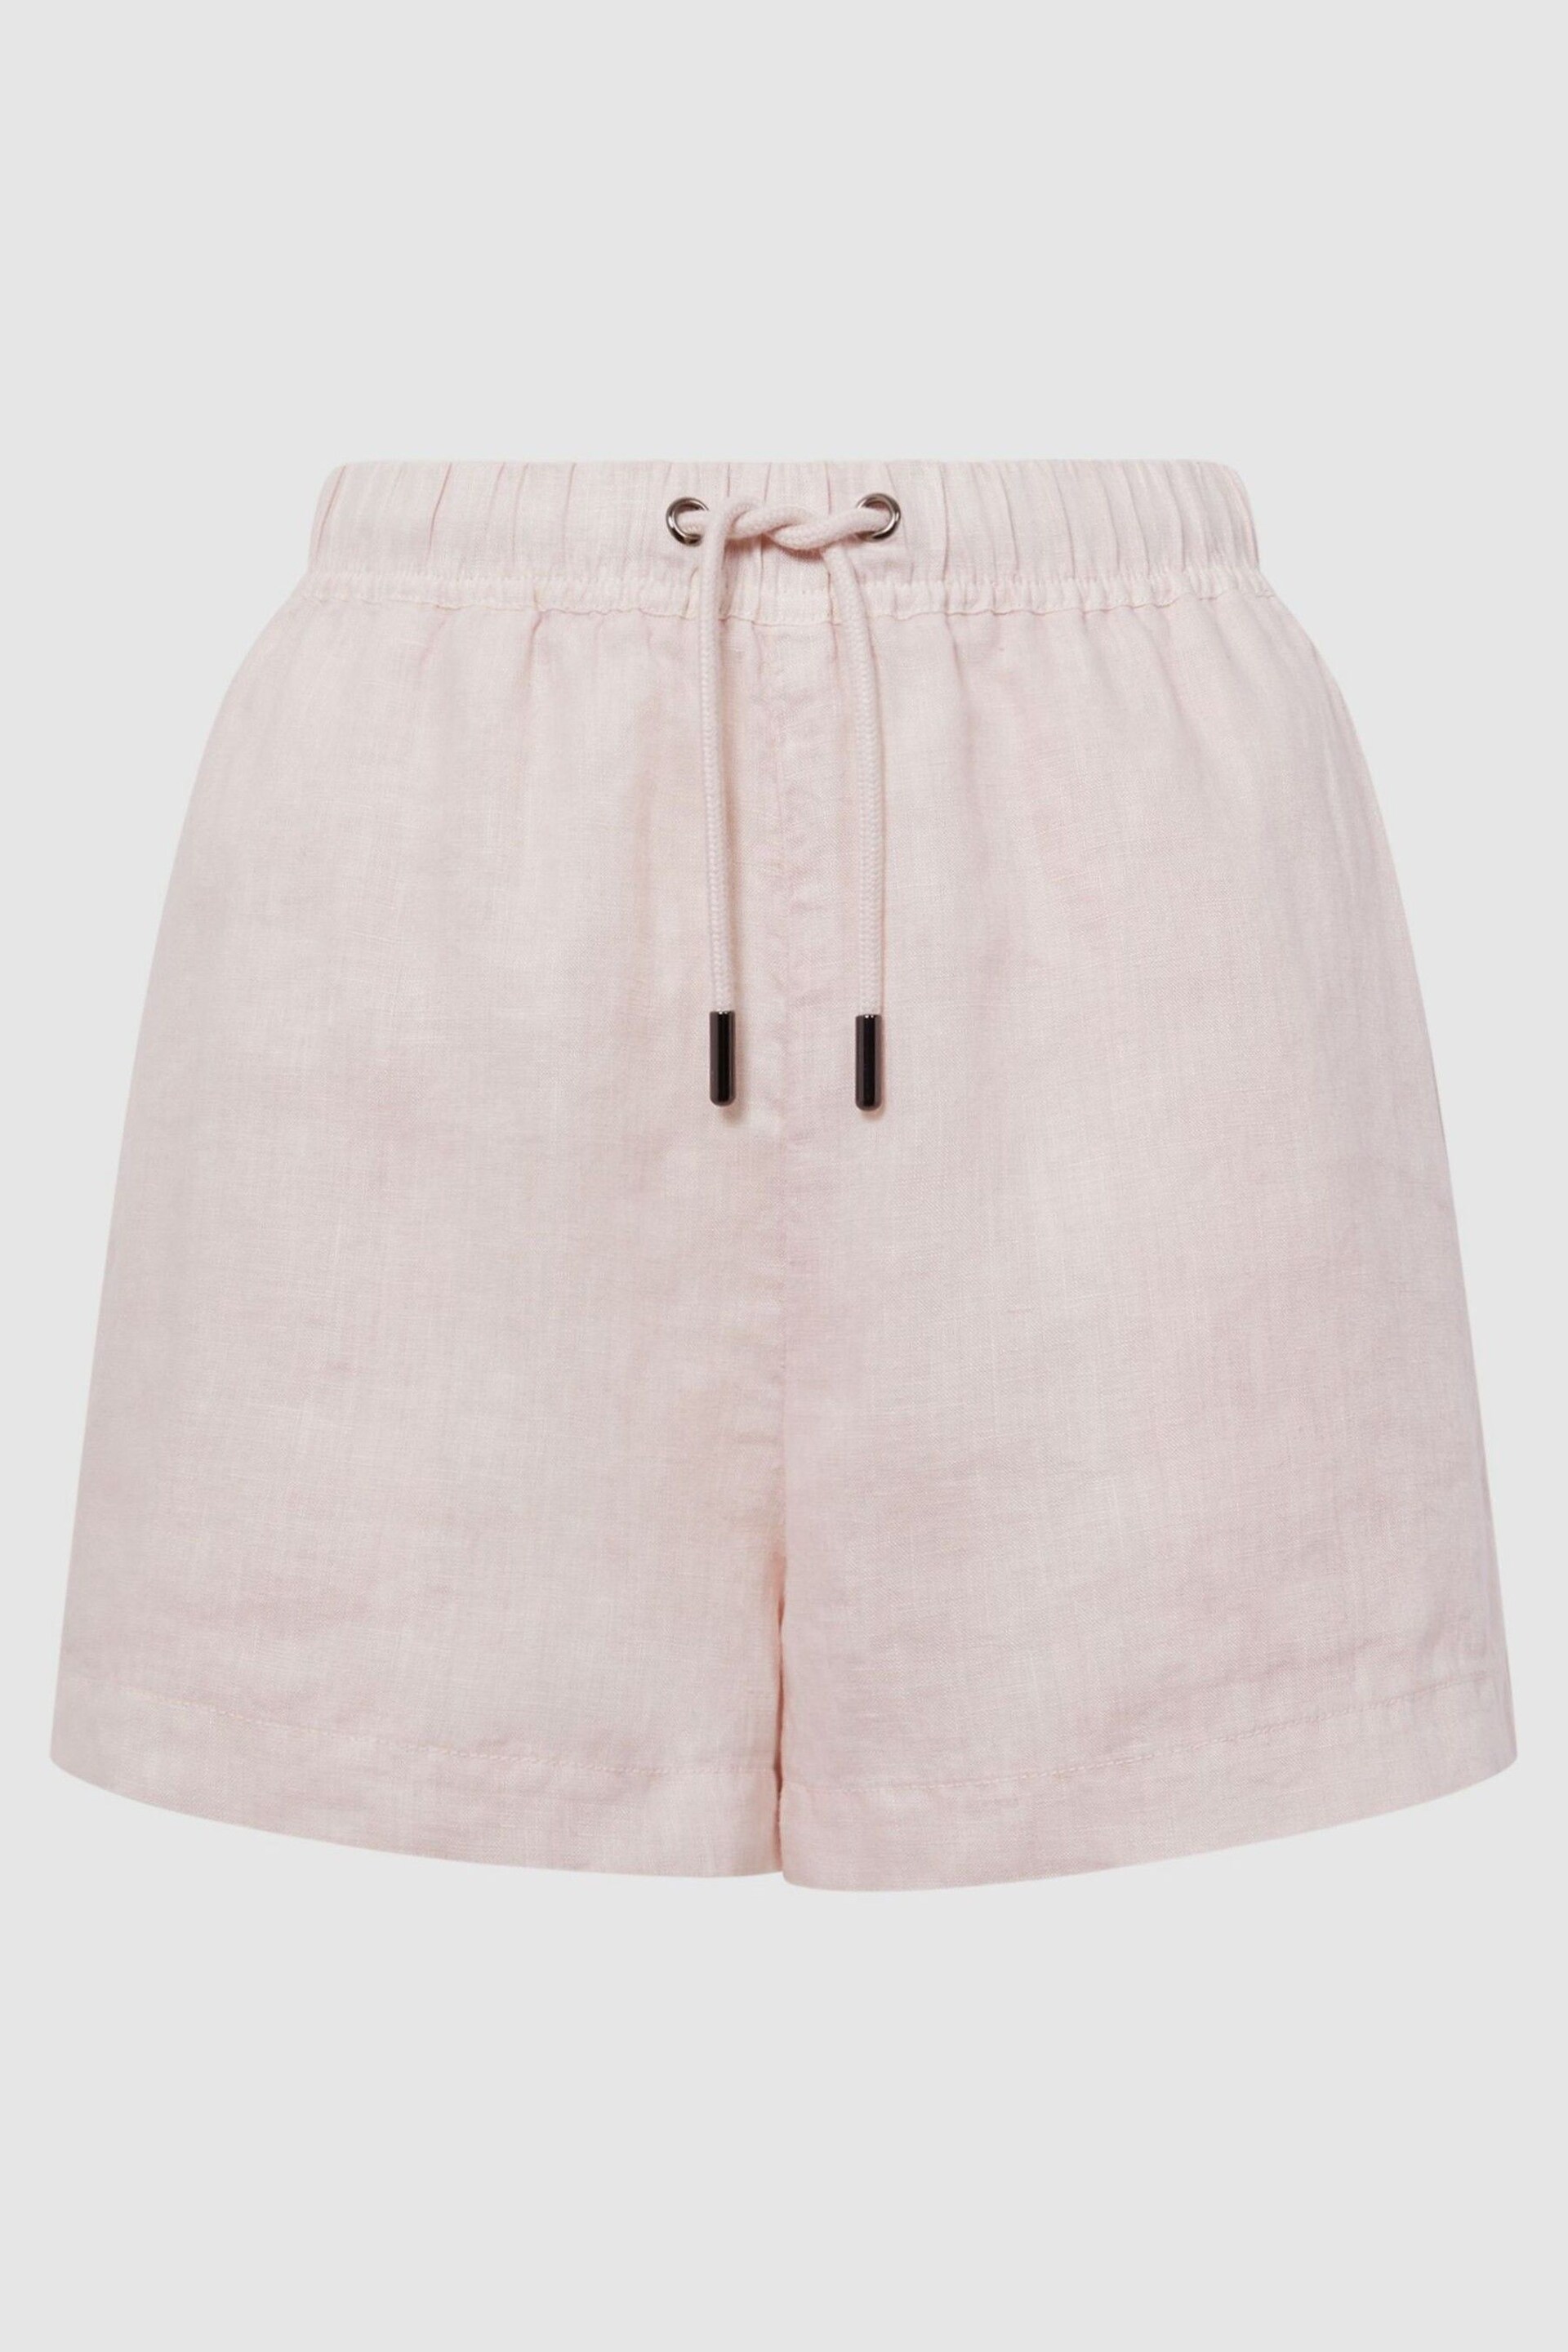 Reiss Soft Pink Cleo Linen Drawstring Shorts - Image 2 of 5